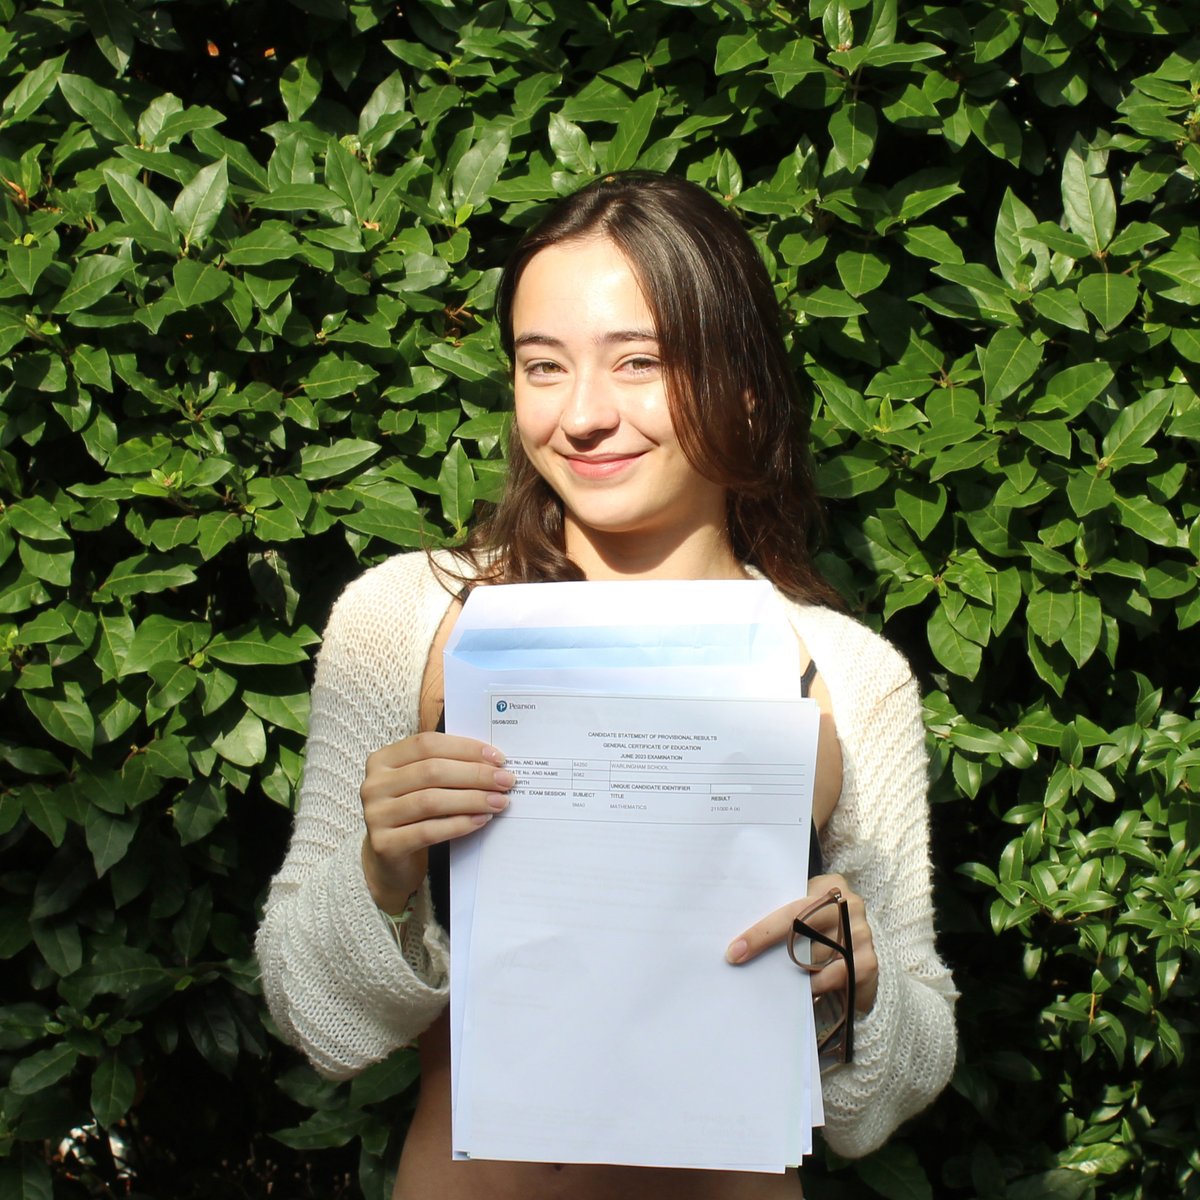 We're very proud of Lucia who achieved A A A at A Level and is off to the @UniofOxford to study Earth Sciences!